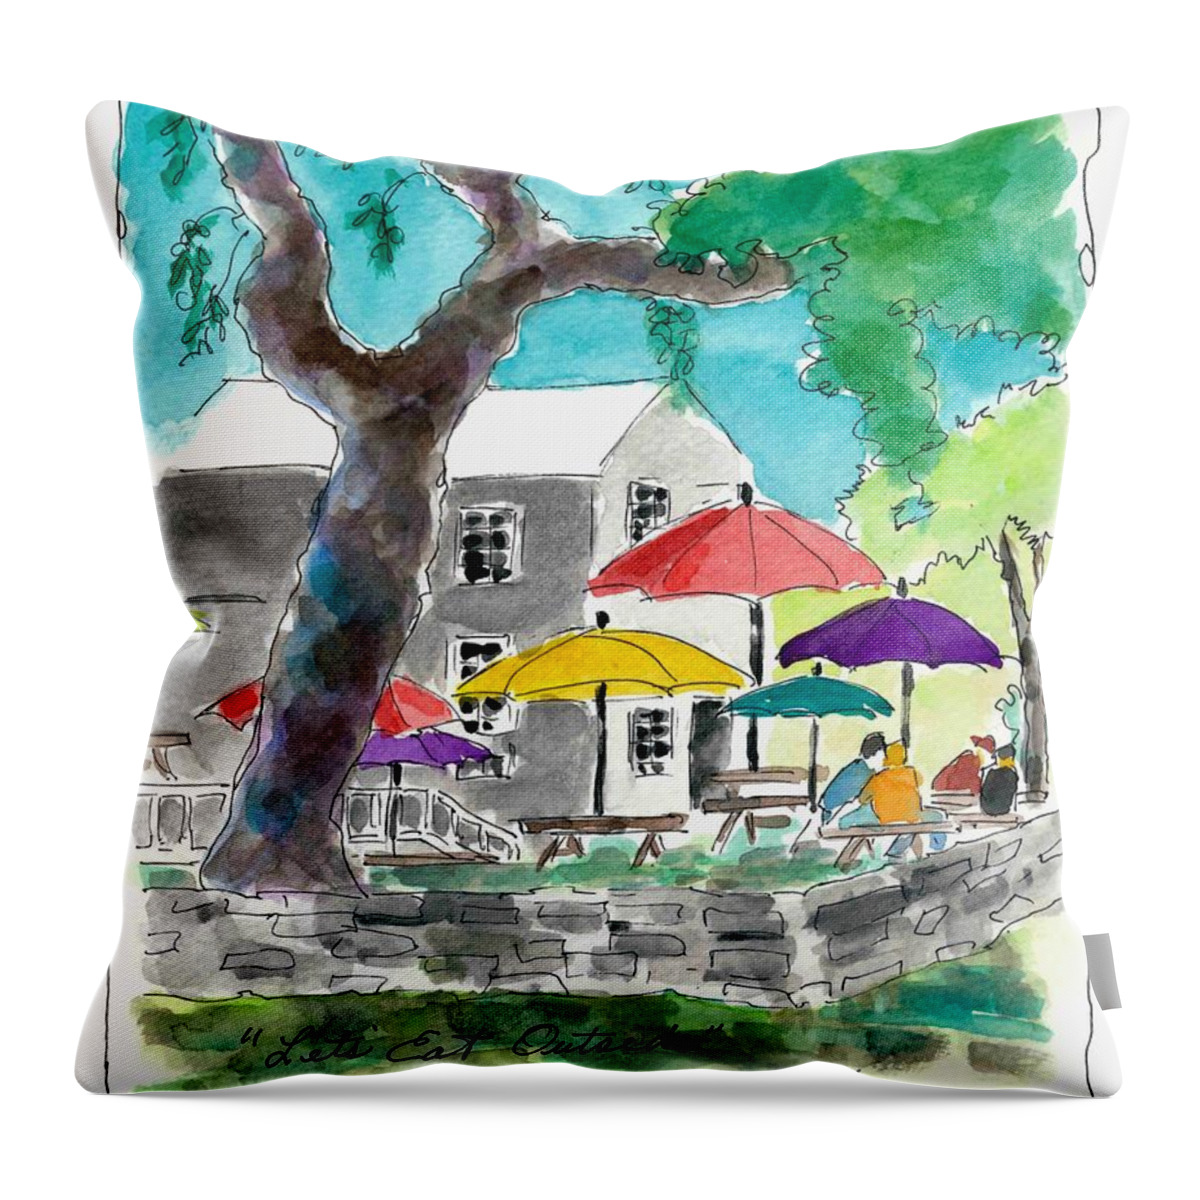 Outdoors Throw Pillow featuring the painting Let's Eat Outside by Adele Bower